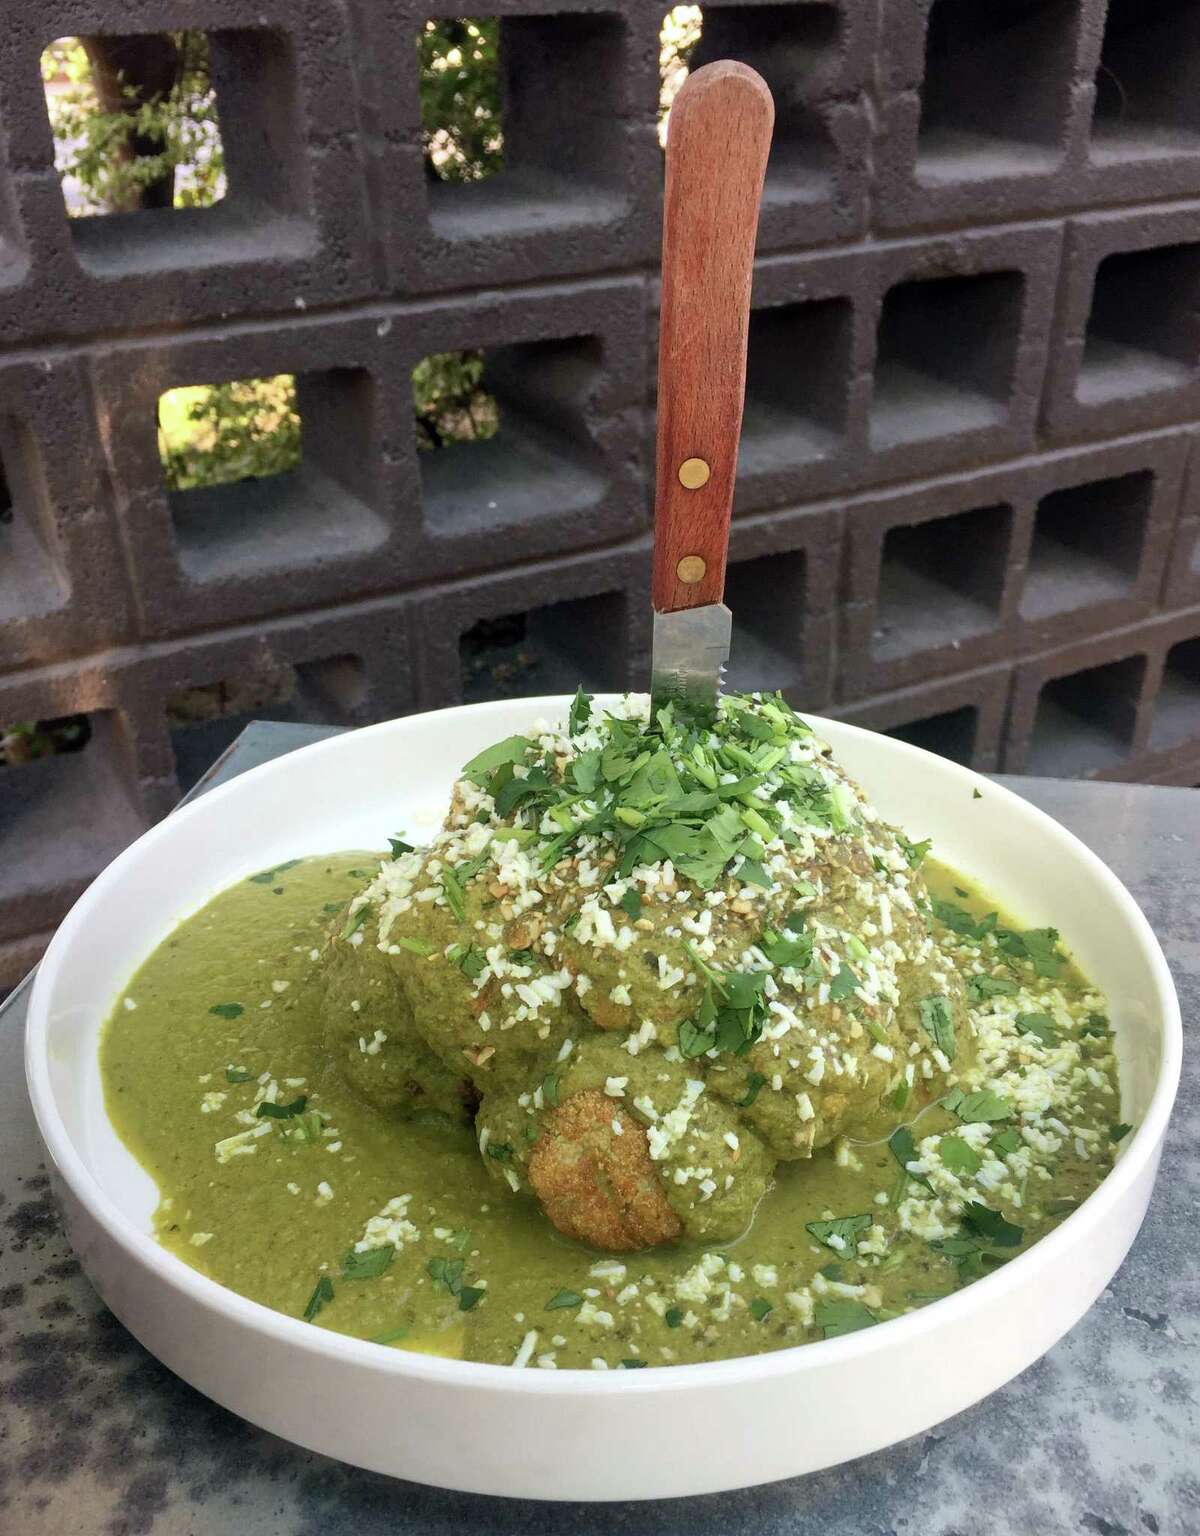 The Roasted Green Goddess Cauliflower at Chisme is served with green pipián mole, toasted green pumpkin seeds, Cotija cheese and cilantro.